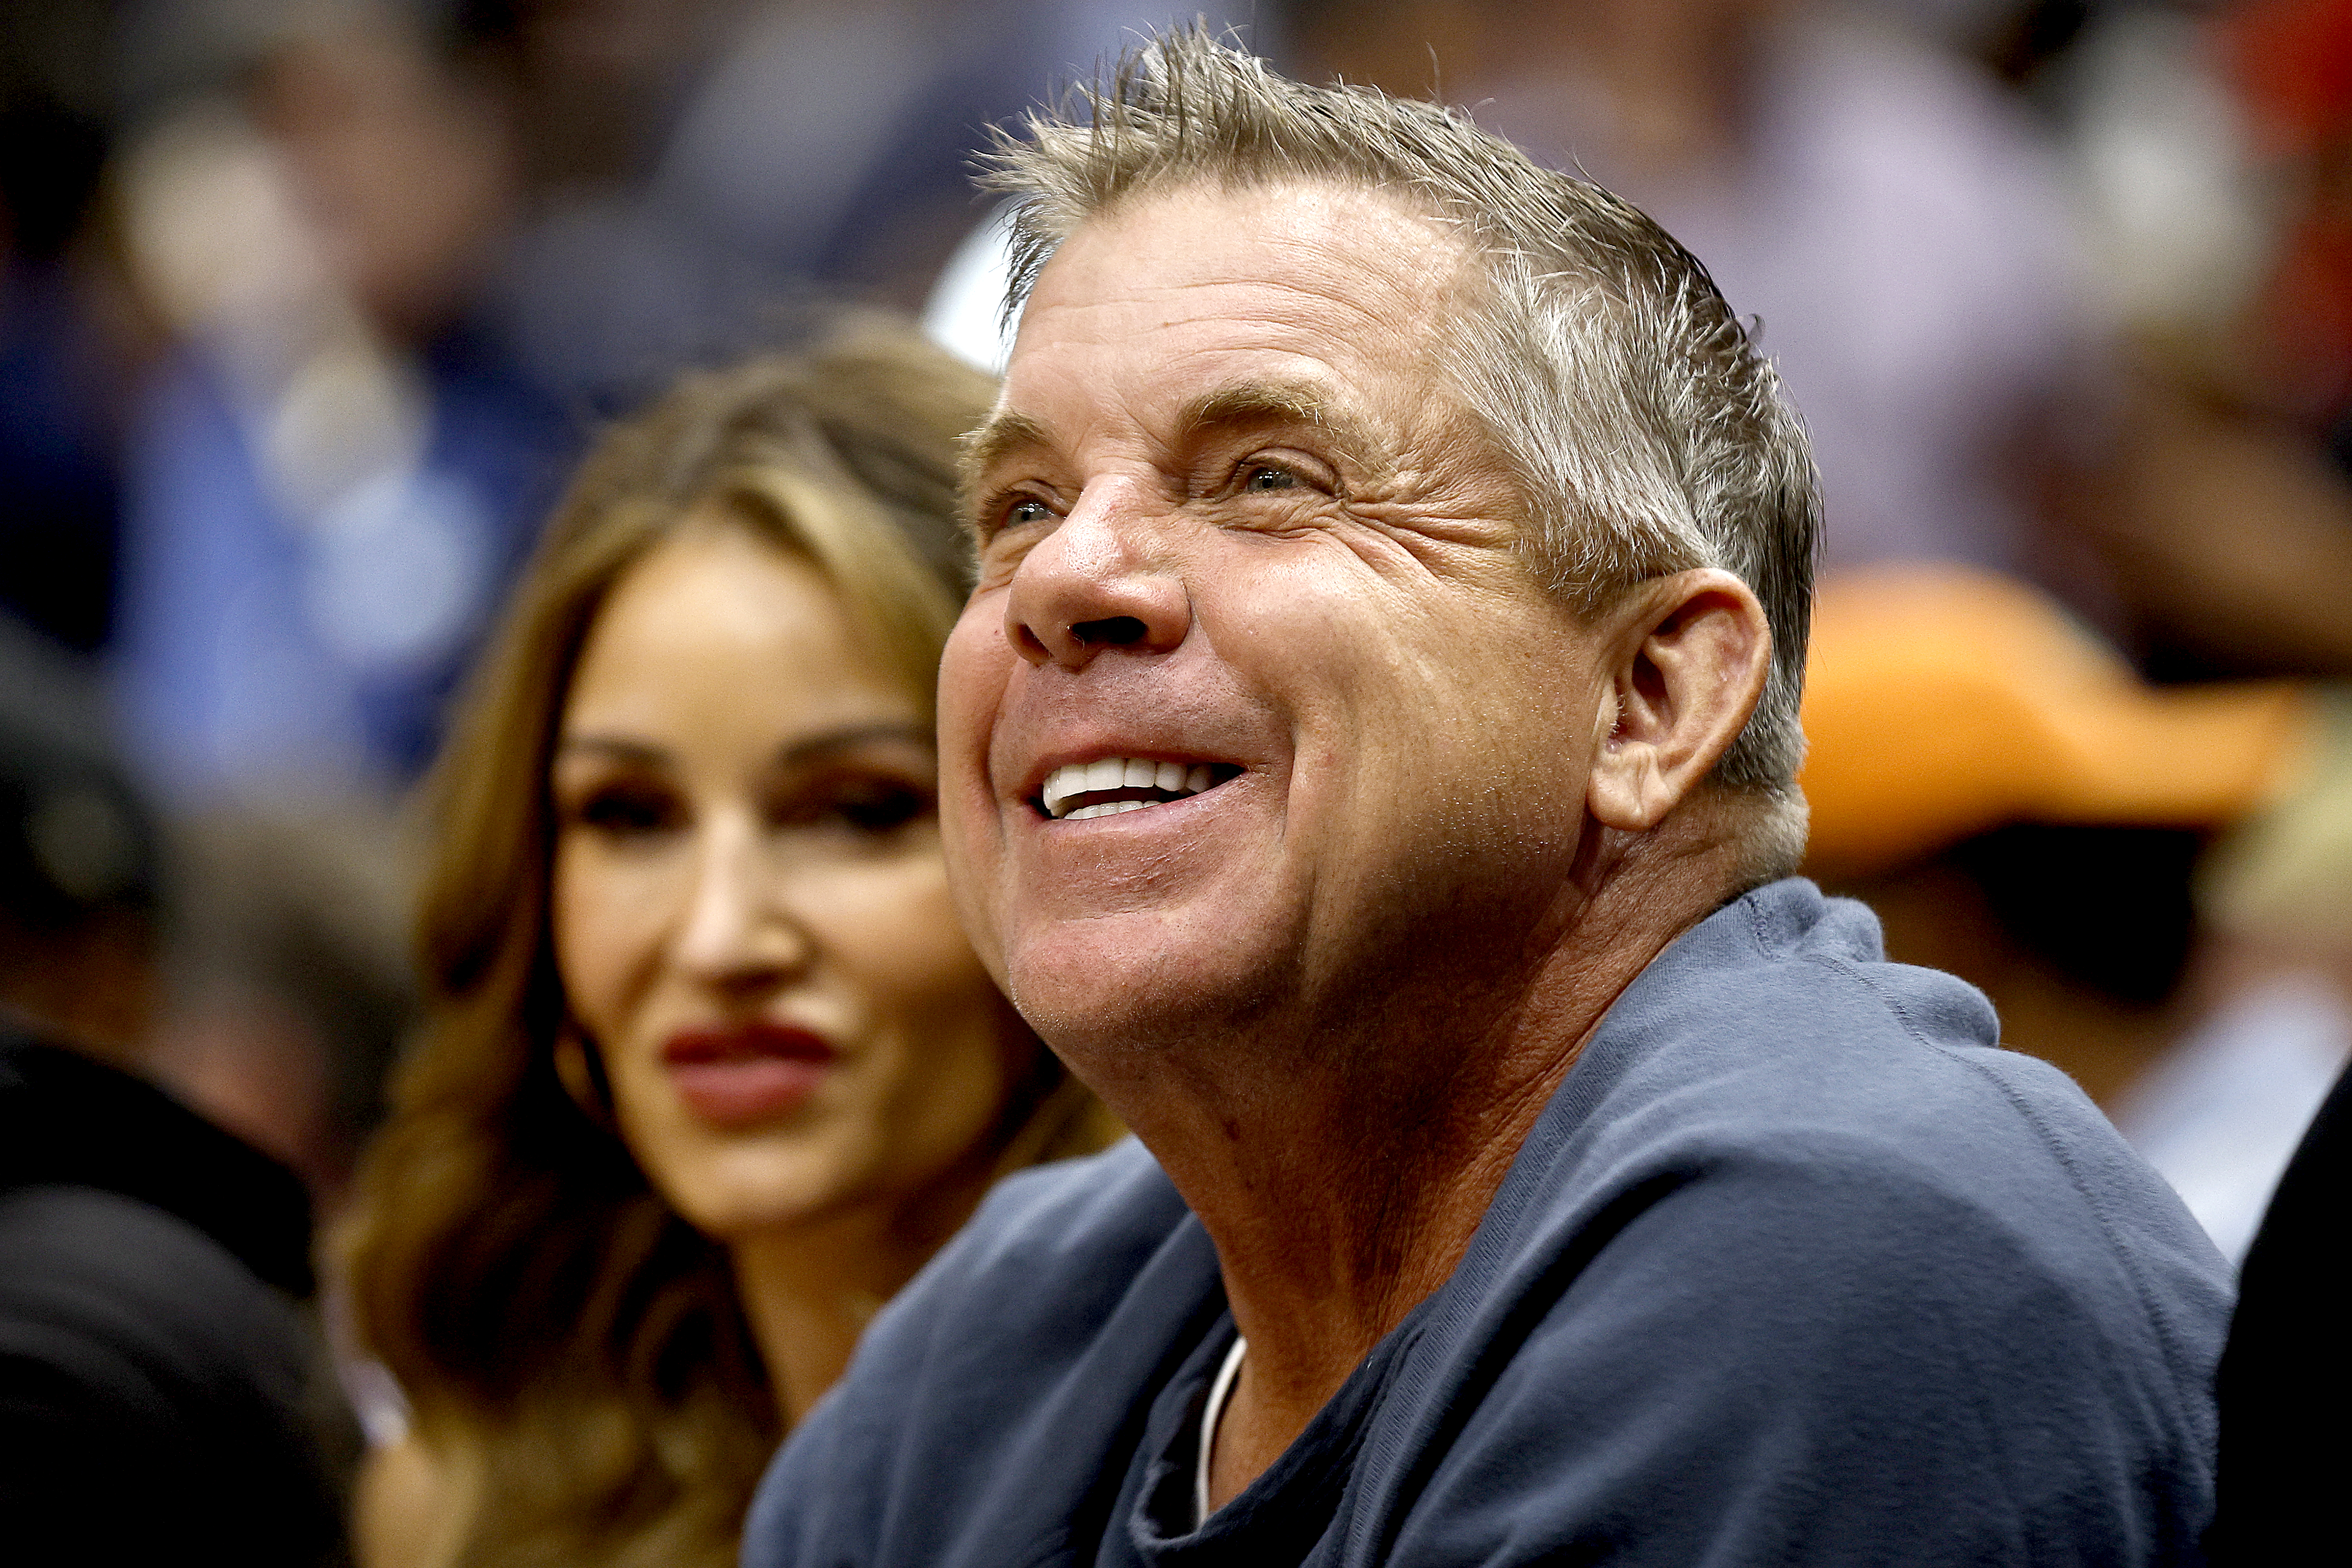 Sean Payton former head coach of the New Orleans Saints looks on during the third quarter of an NBA game between the Dallas Mavericks and the New Orleans Pelicans at Smoothie King Center on October 25, 2022 in New Orleans, Louisiana.